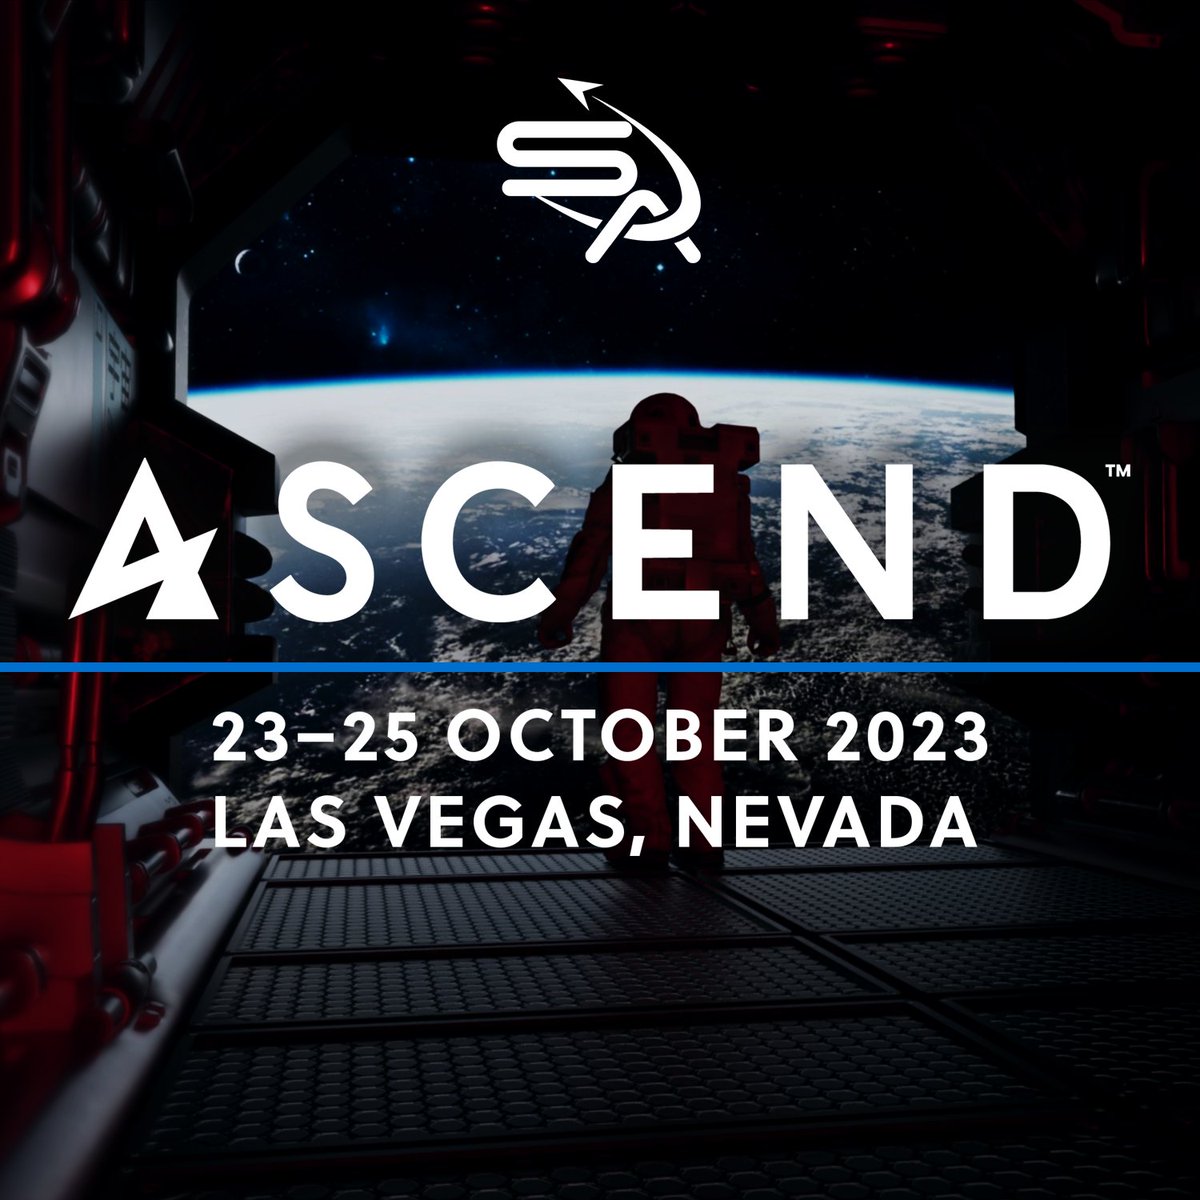 Will you be joining our Stellar Access team at The Ascend Conference in Las Vegas next week? Events Begin on the 23rd of October.

Please make sure to stop by our booth #912 and say hello. We have some exciting news to share!

#Ascend2023 #stellaraccess #makingspaceforyou